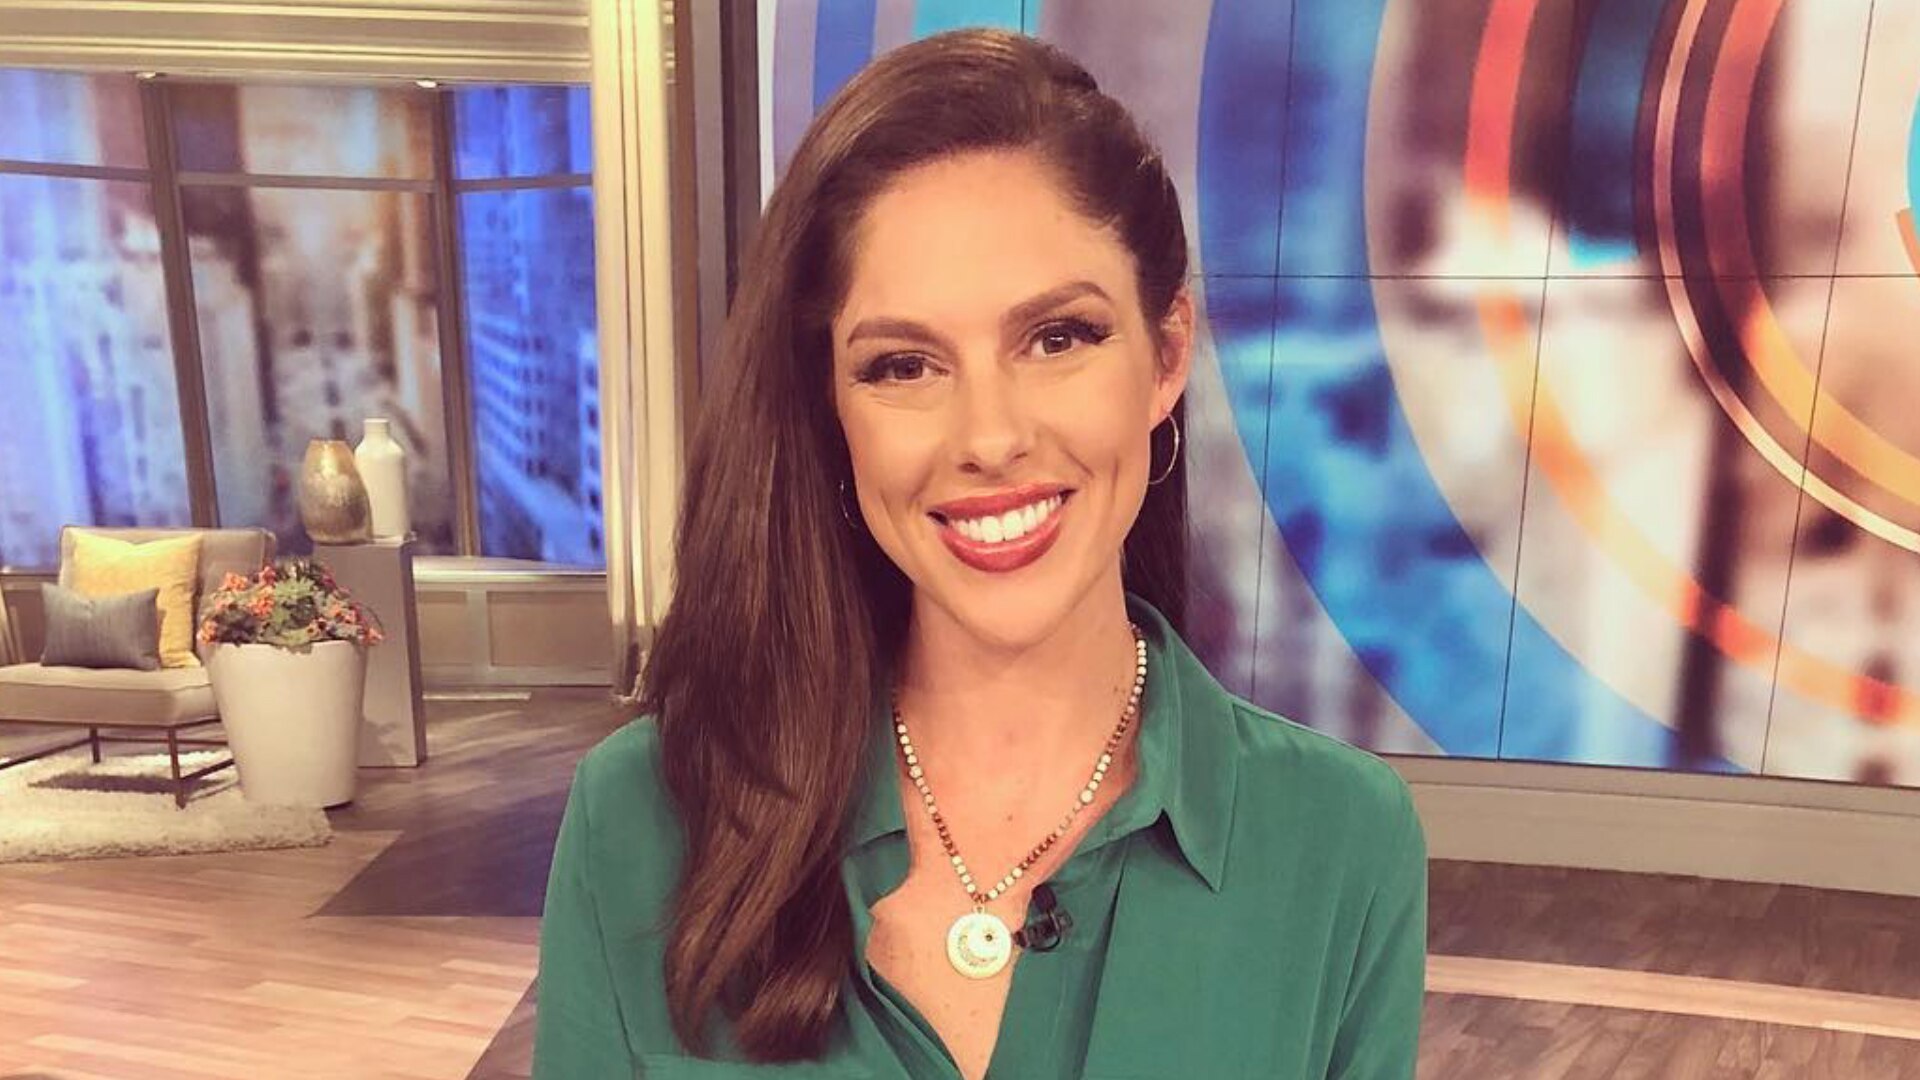 Watch Access Hollywood Interview: 'The View' Co-Host Abby Huntsman Announces She's ...1920 x 1080